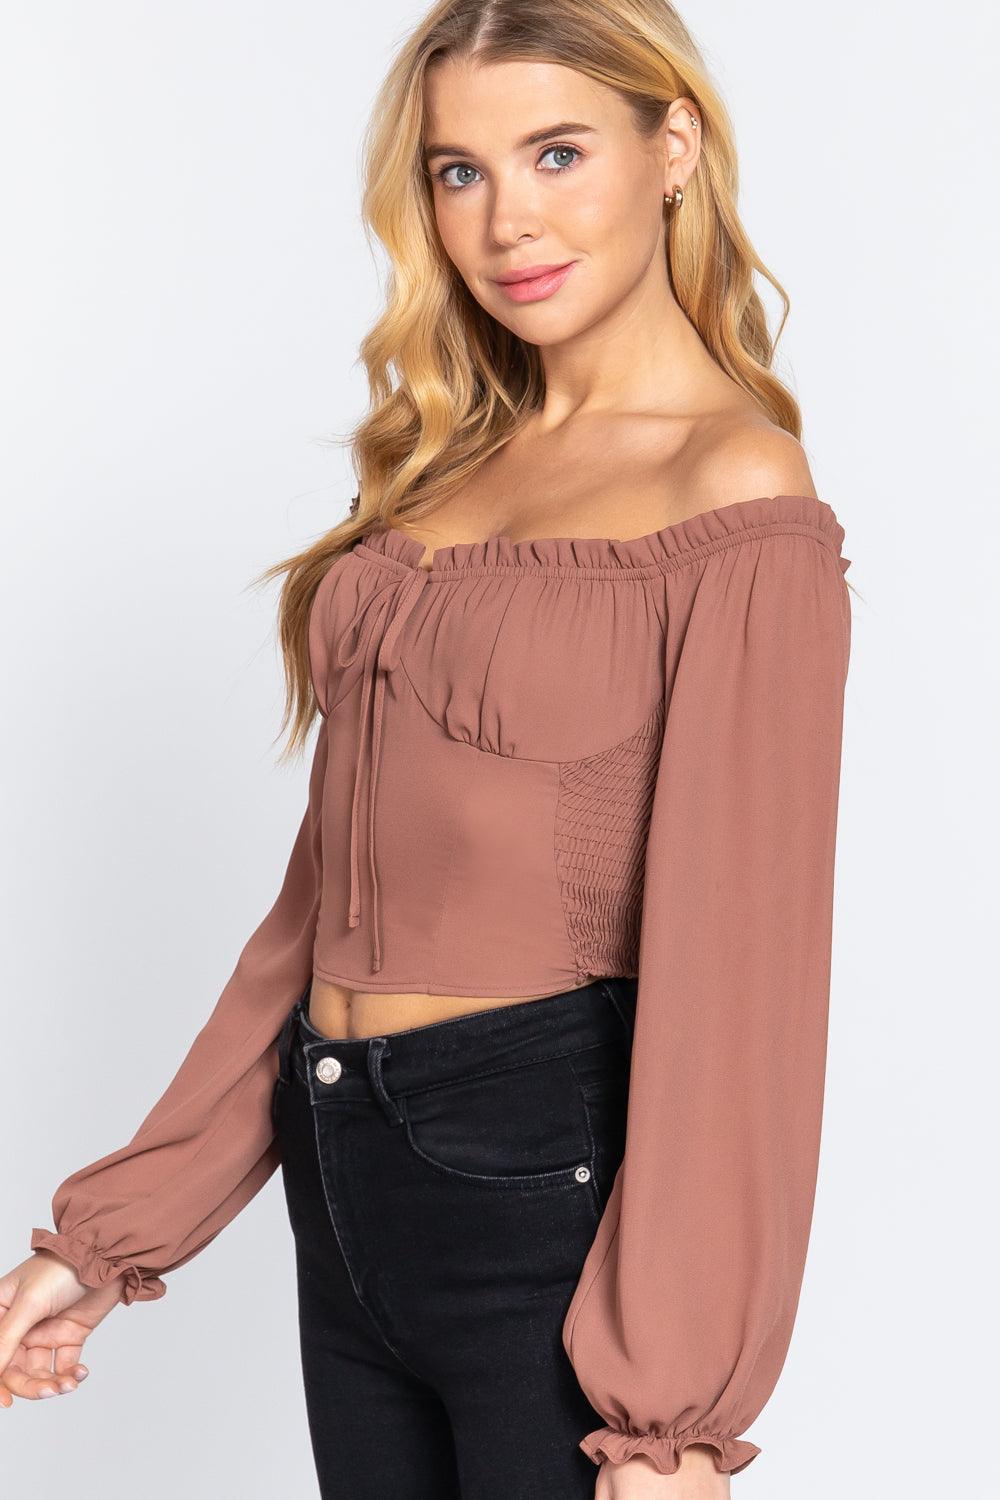 Off Shoulder Smocking Woven Top Naughty Smile Fashion